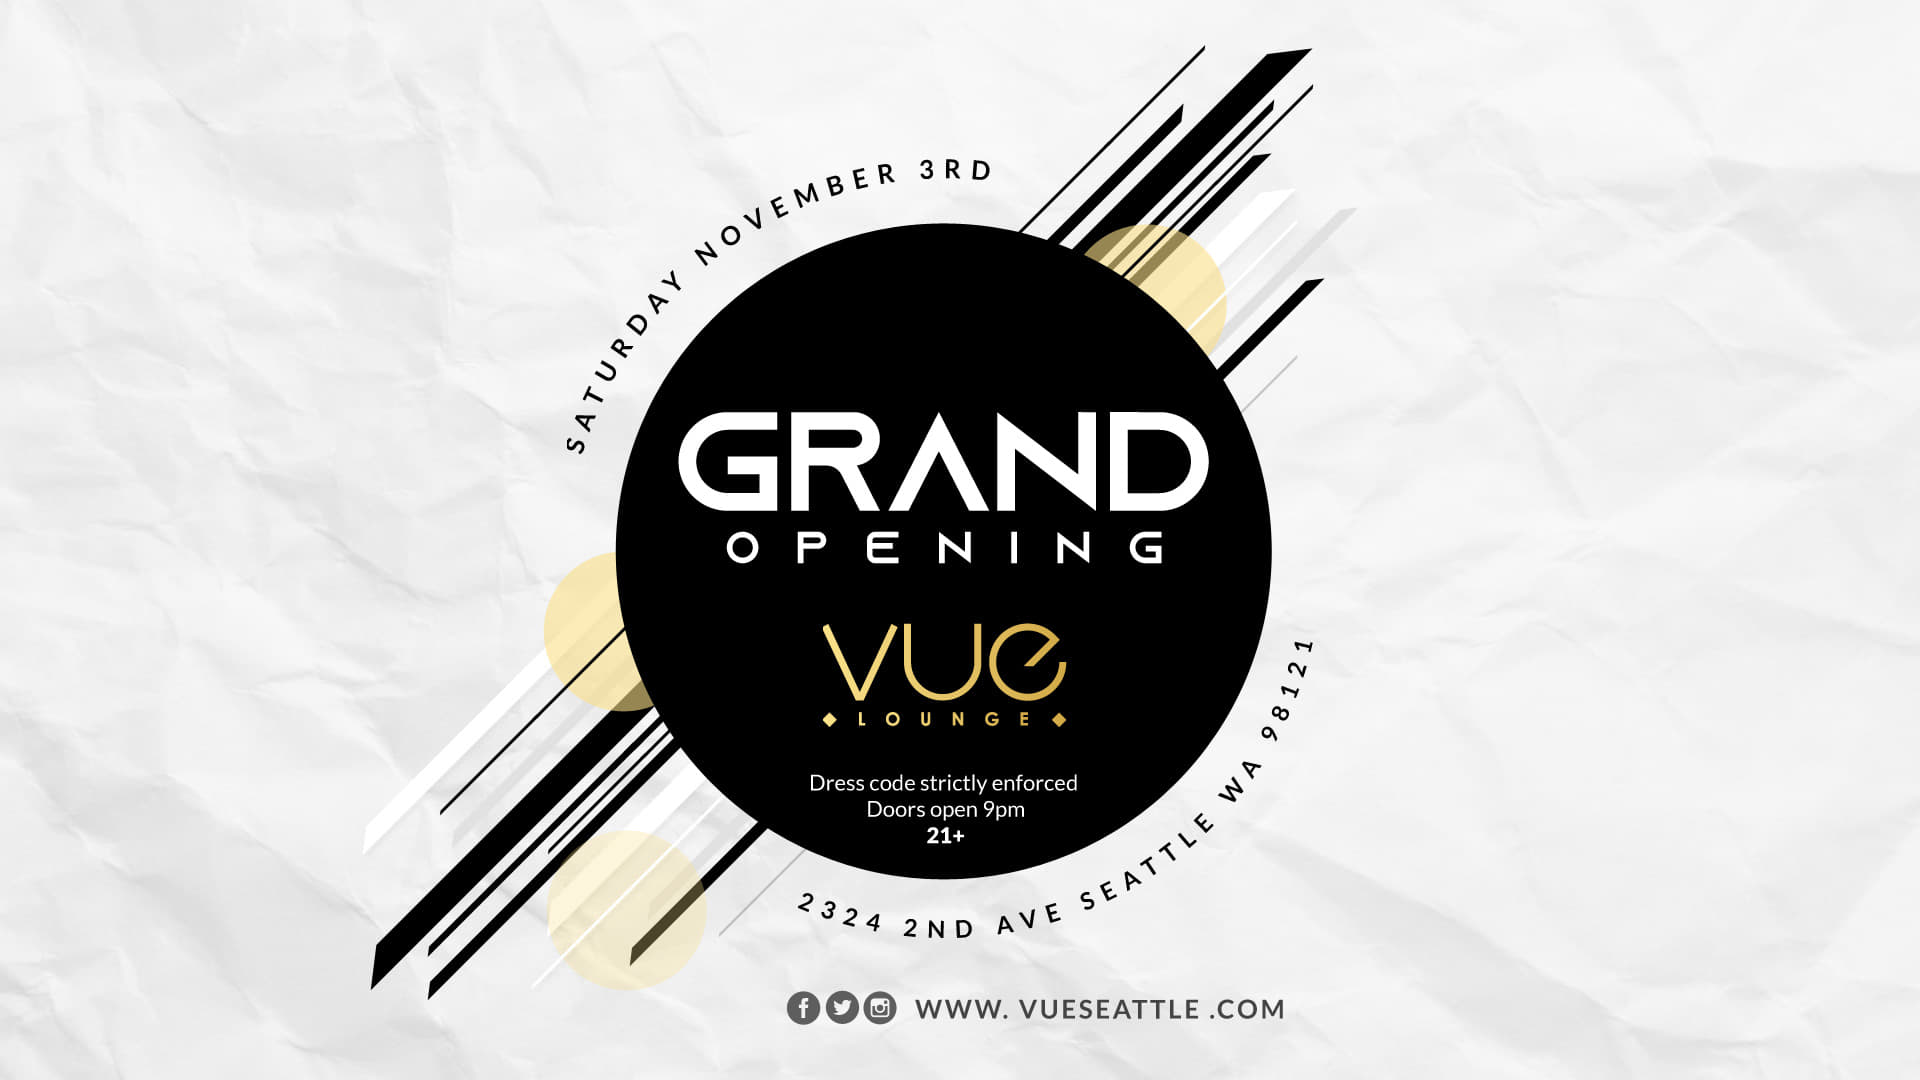 Vue Seattle Grand Opening Poster